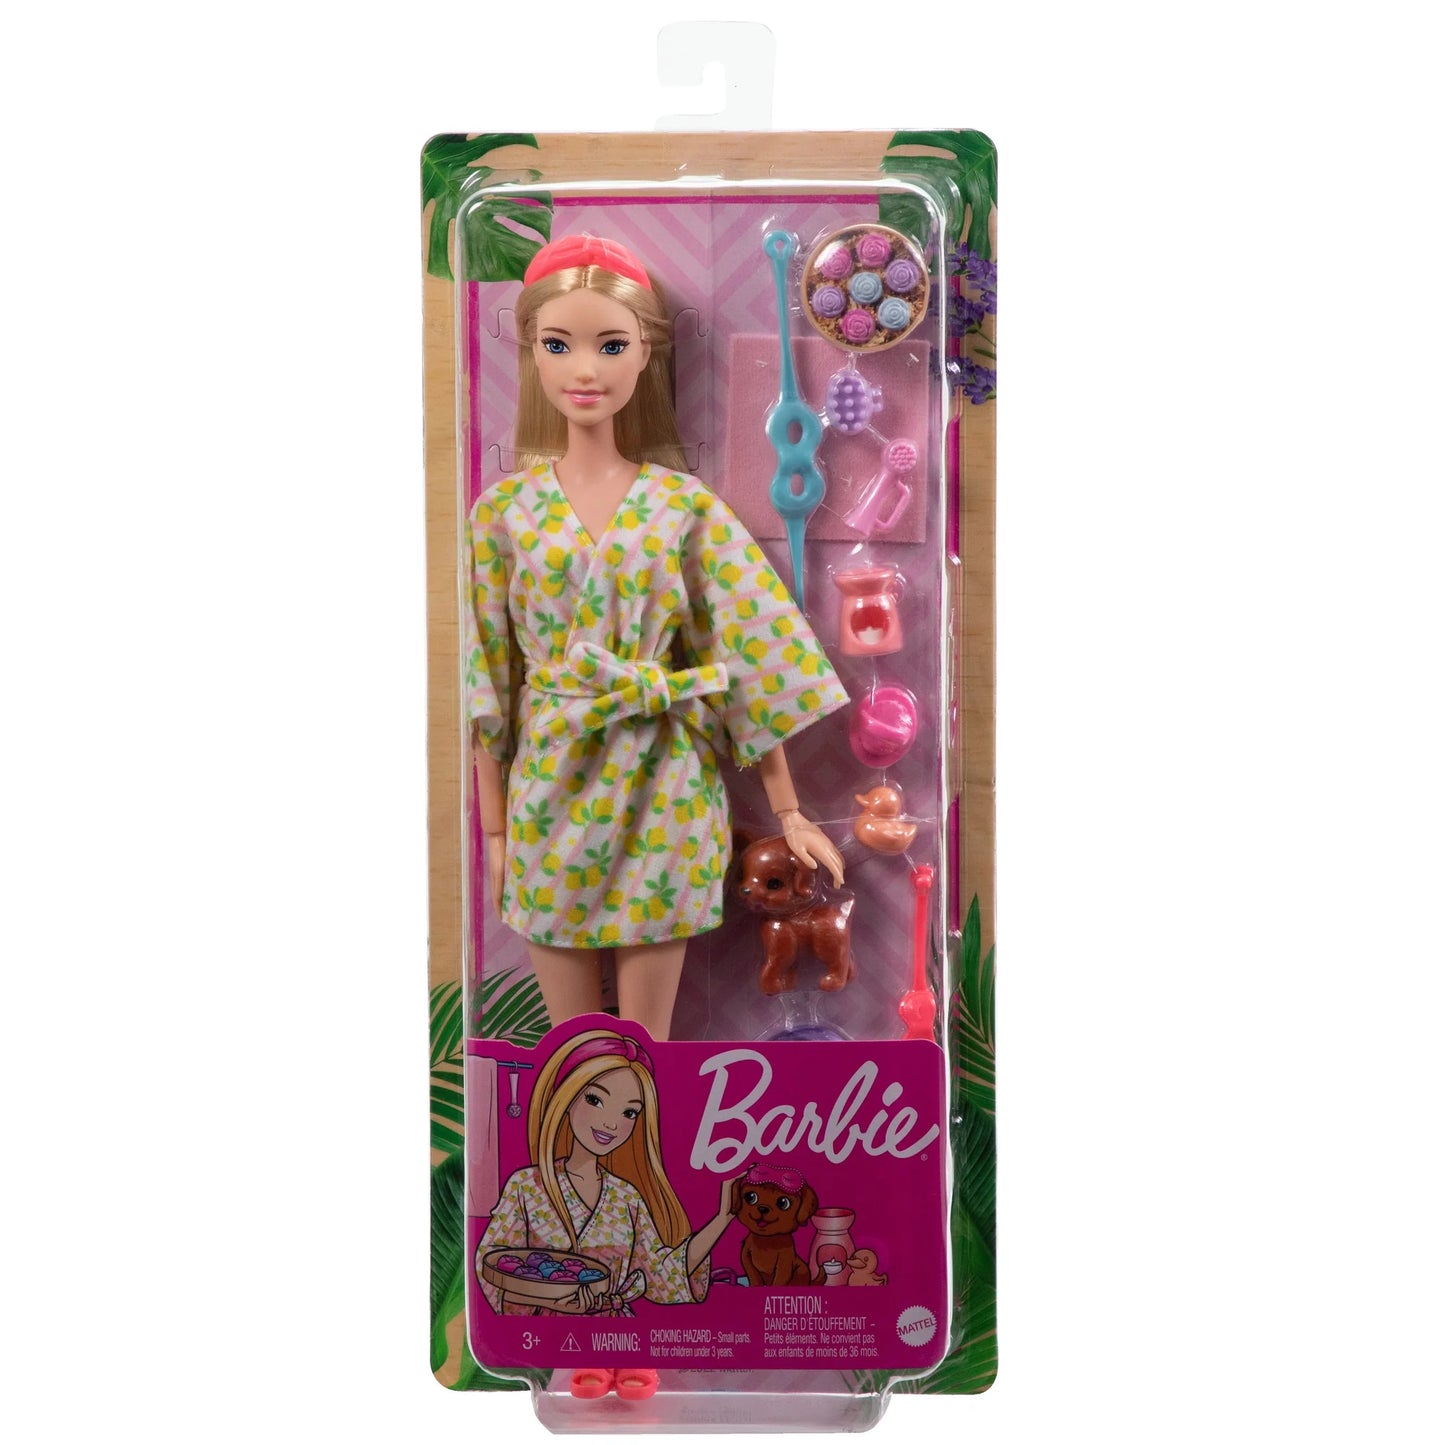 Barbie Wellness Doll Playset With Blonde Doll With Pet Puppy, Barbie Sets, Spa Day, Lemon Print Bathrobe, Headband And Eye Mask | Age :  3 Years + by Mattel